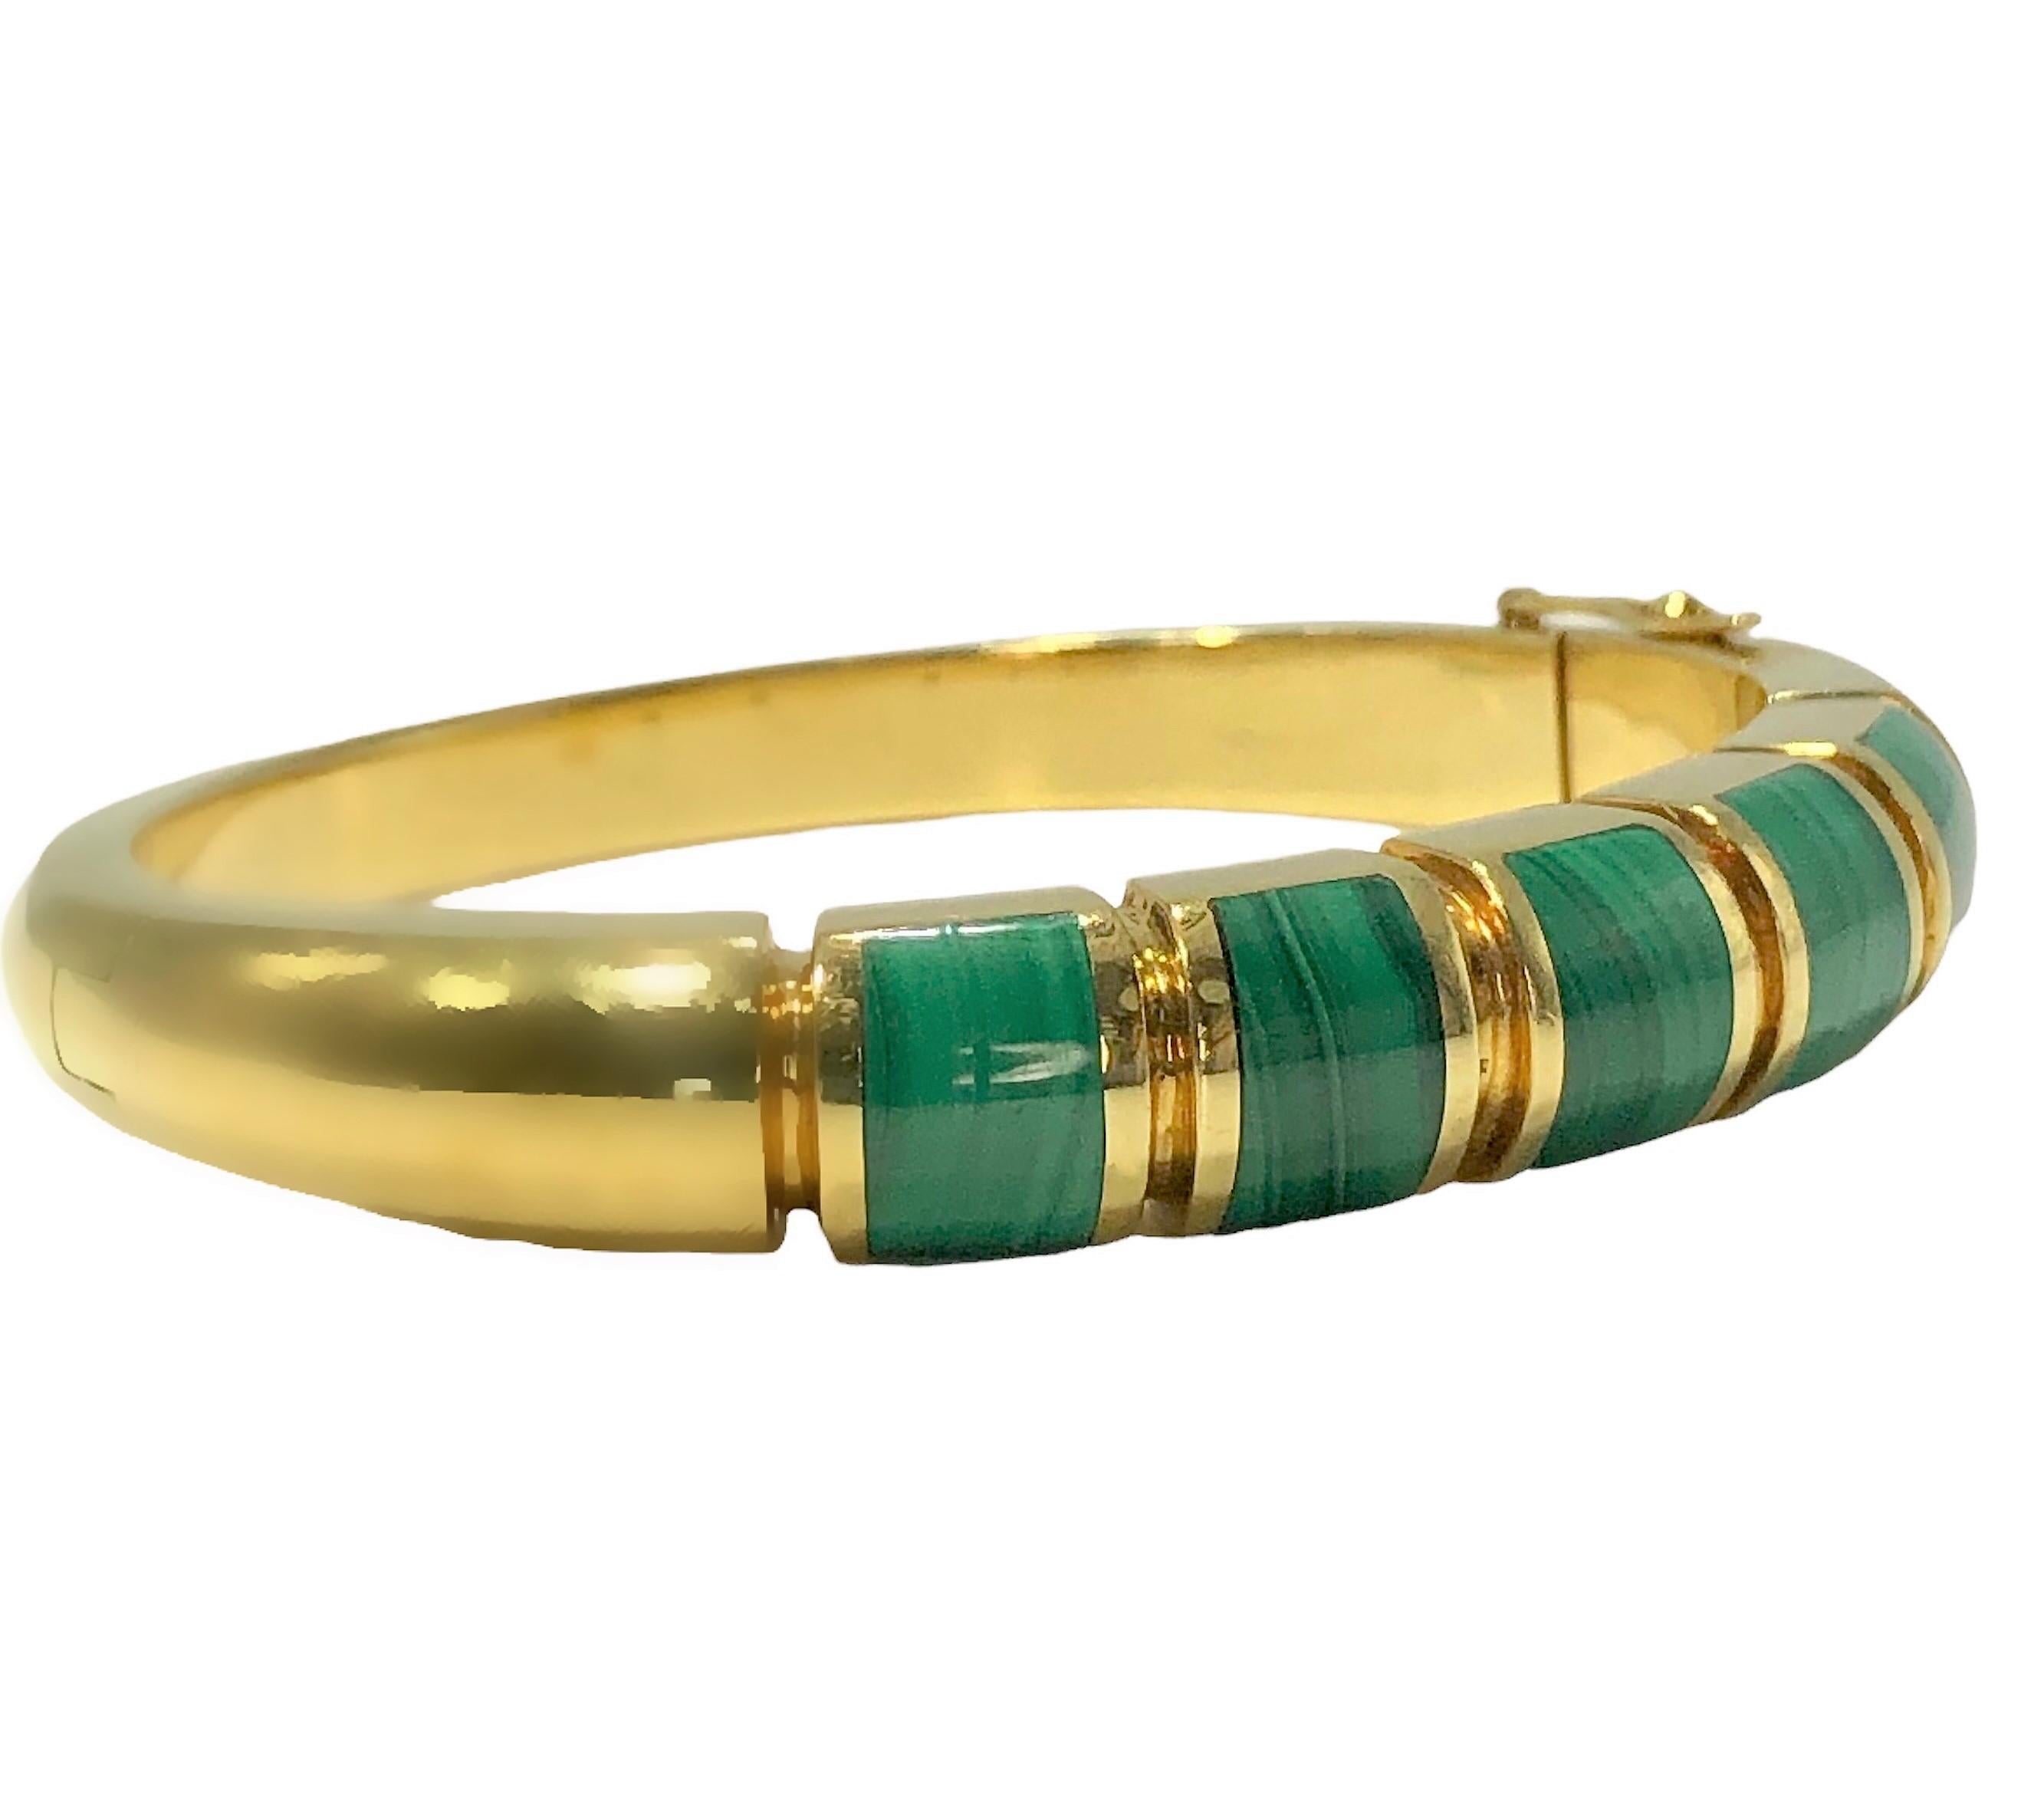 This very well constructed 18K Yellow gold and malachite modernist bangle bracelet was made by the Spanish designer, S'Paliu. At the front are five separate stations, each inlaid artfully with bombe malachite slabs. Measures just over 3/8 inch at